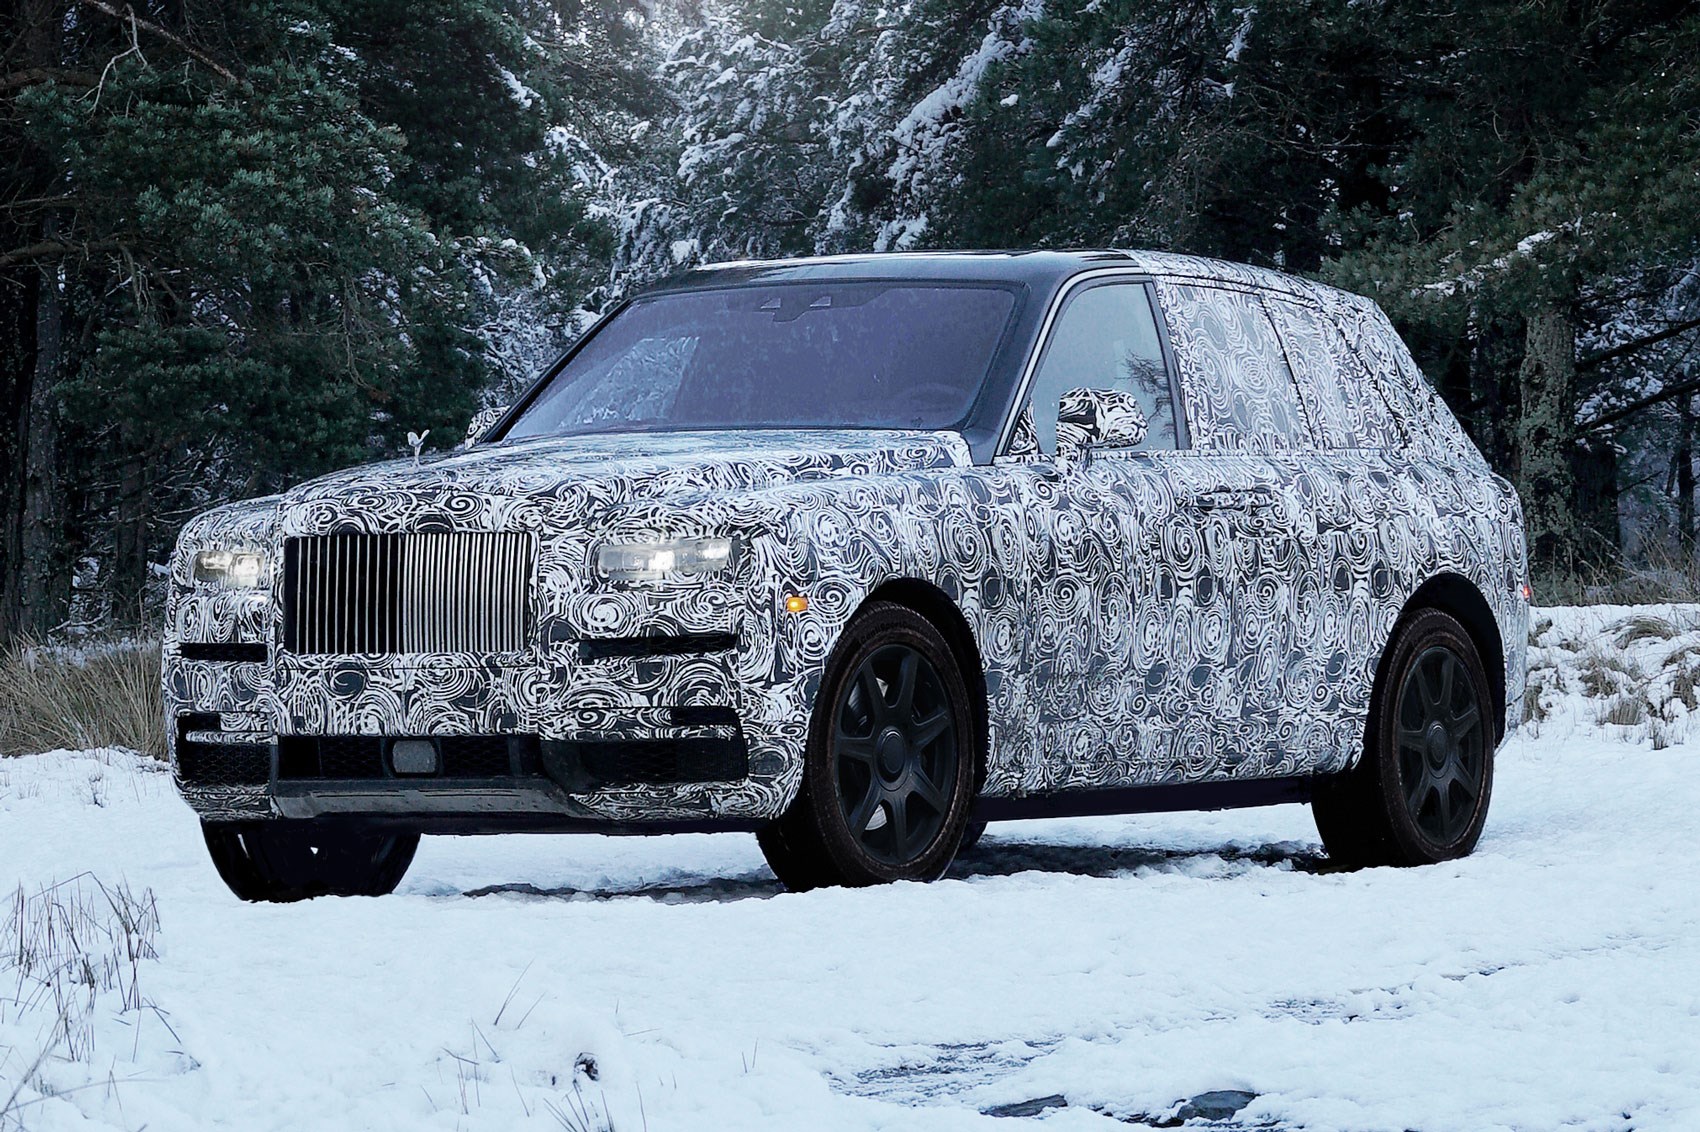 The best bit of the new 2018 Rolls-Royce Cullinan is a pair of folding  seats